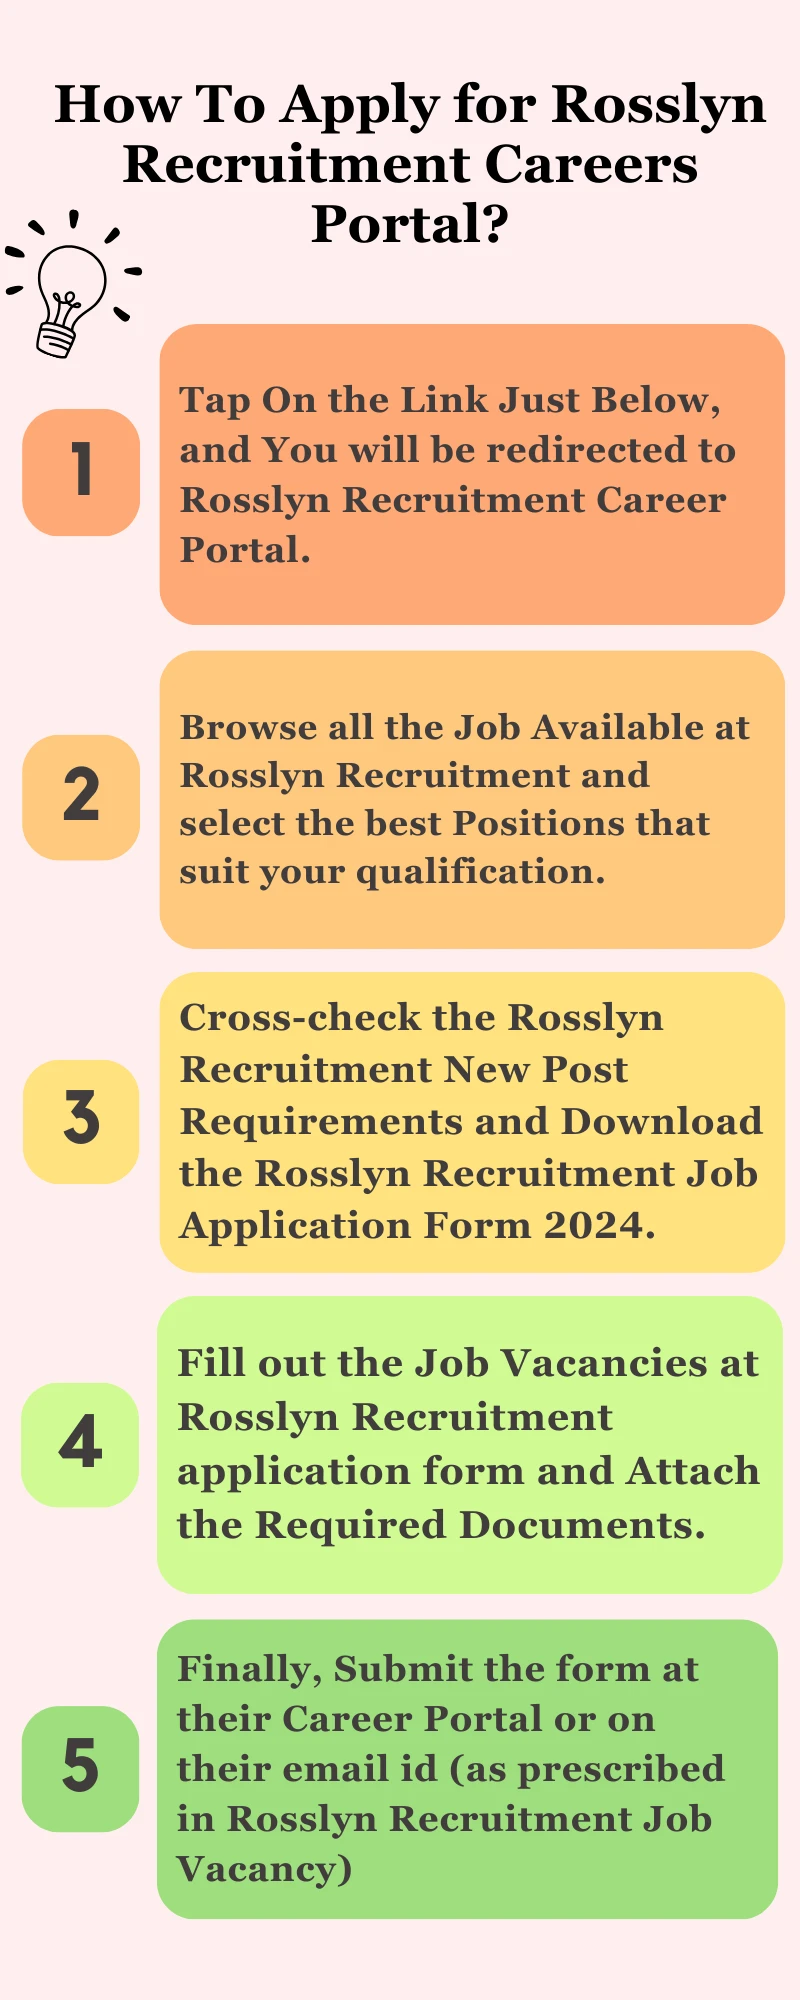 How To Apply for Rosslyn Recruitment Careers Portal?